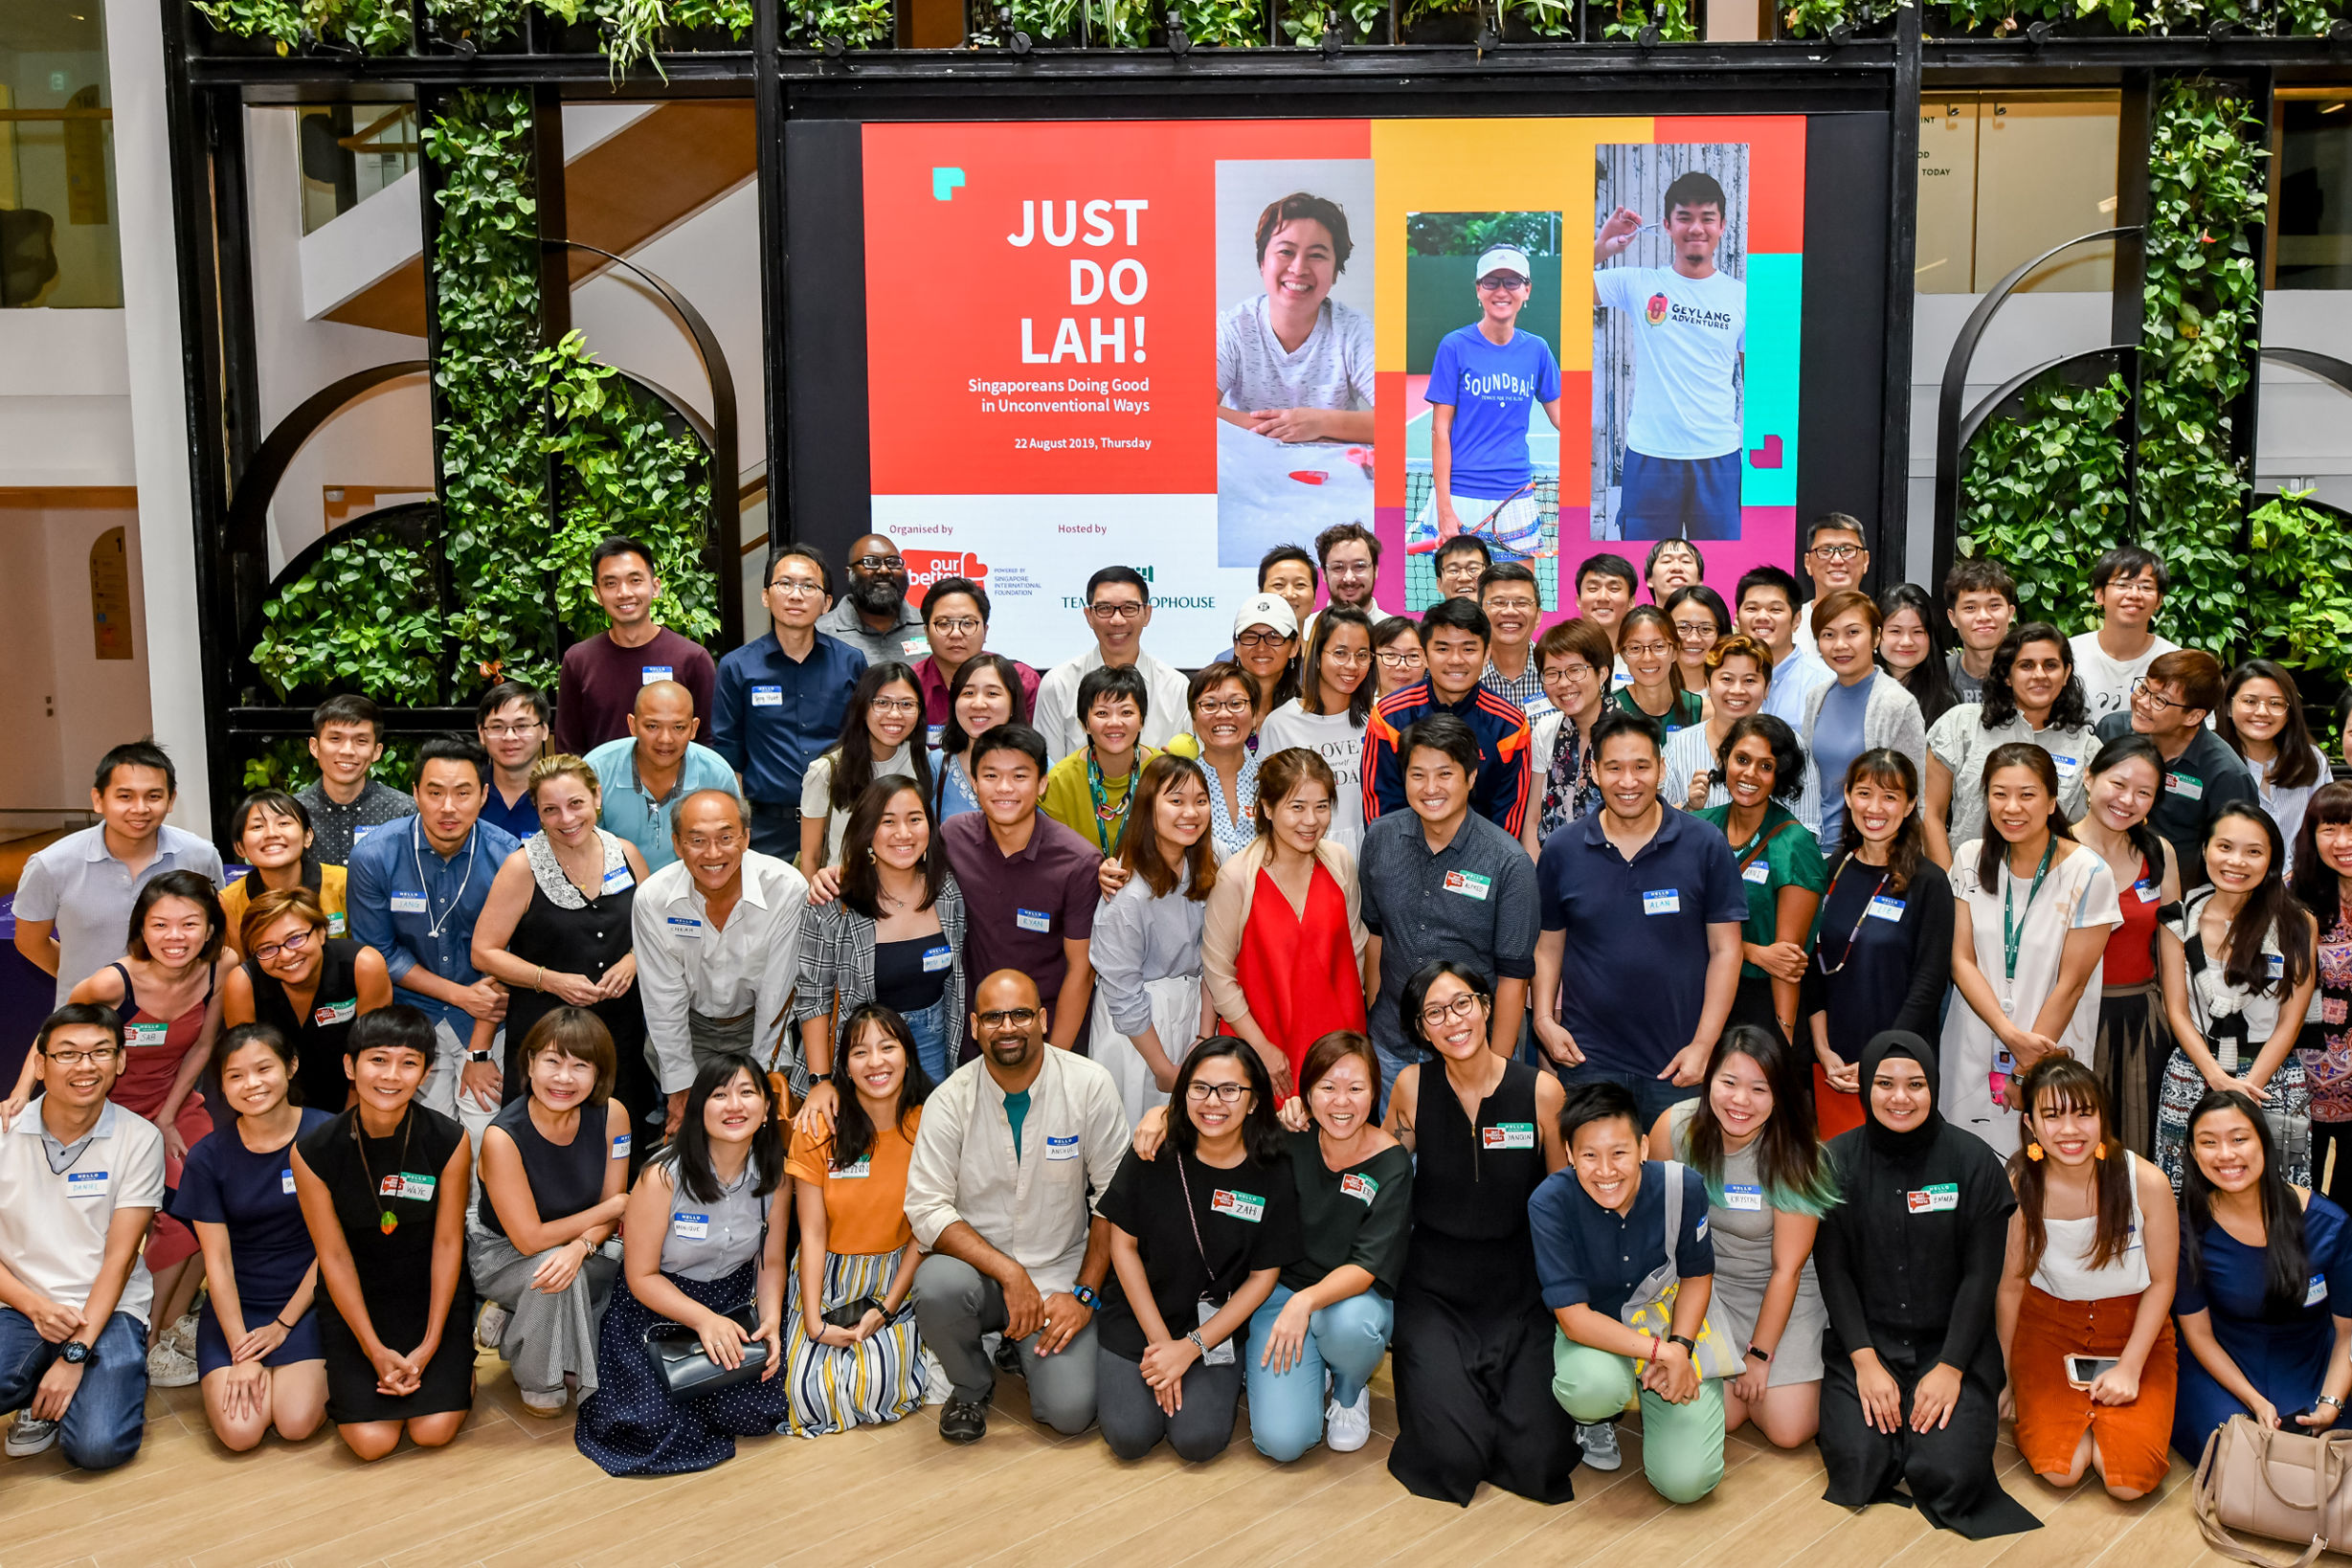 Group photo of people and our better world team members at Just Do Lah event in Singapore